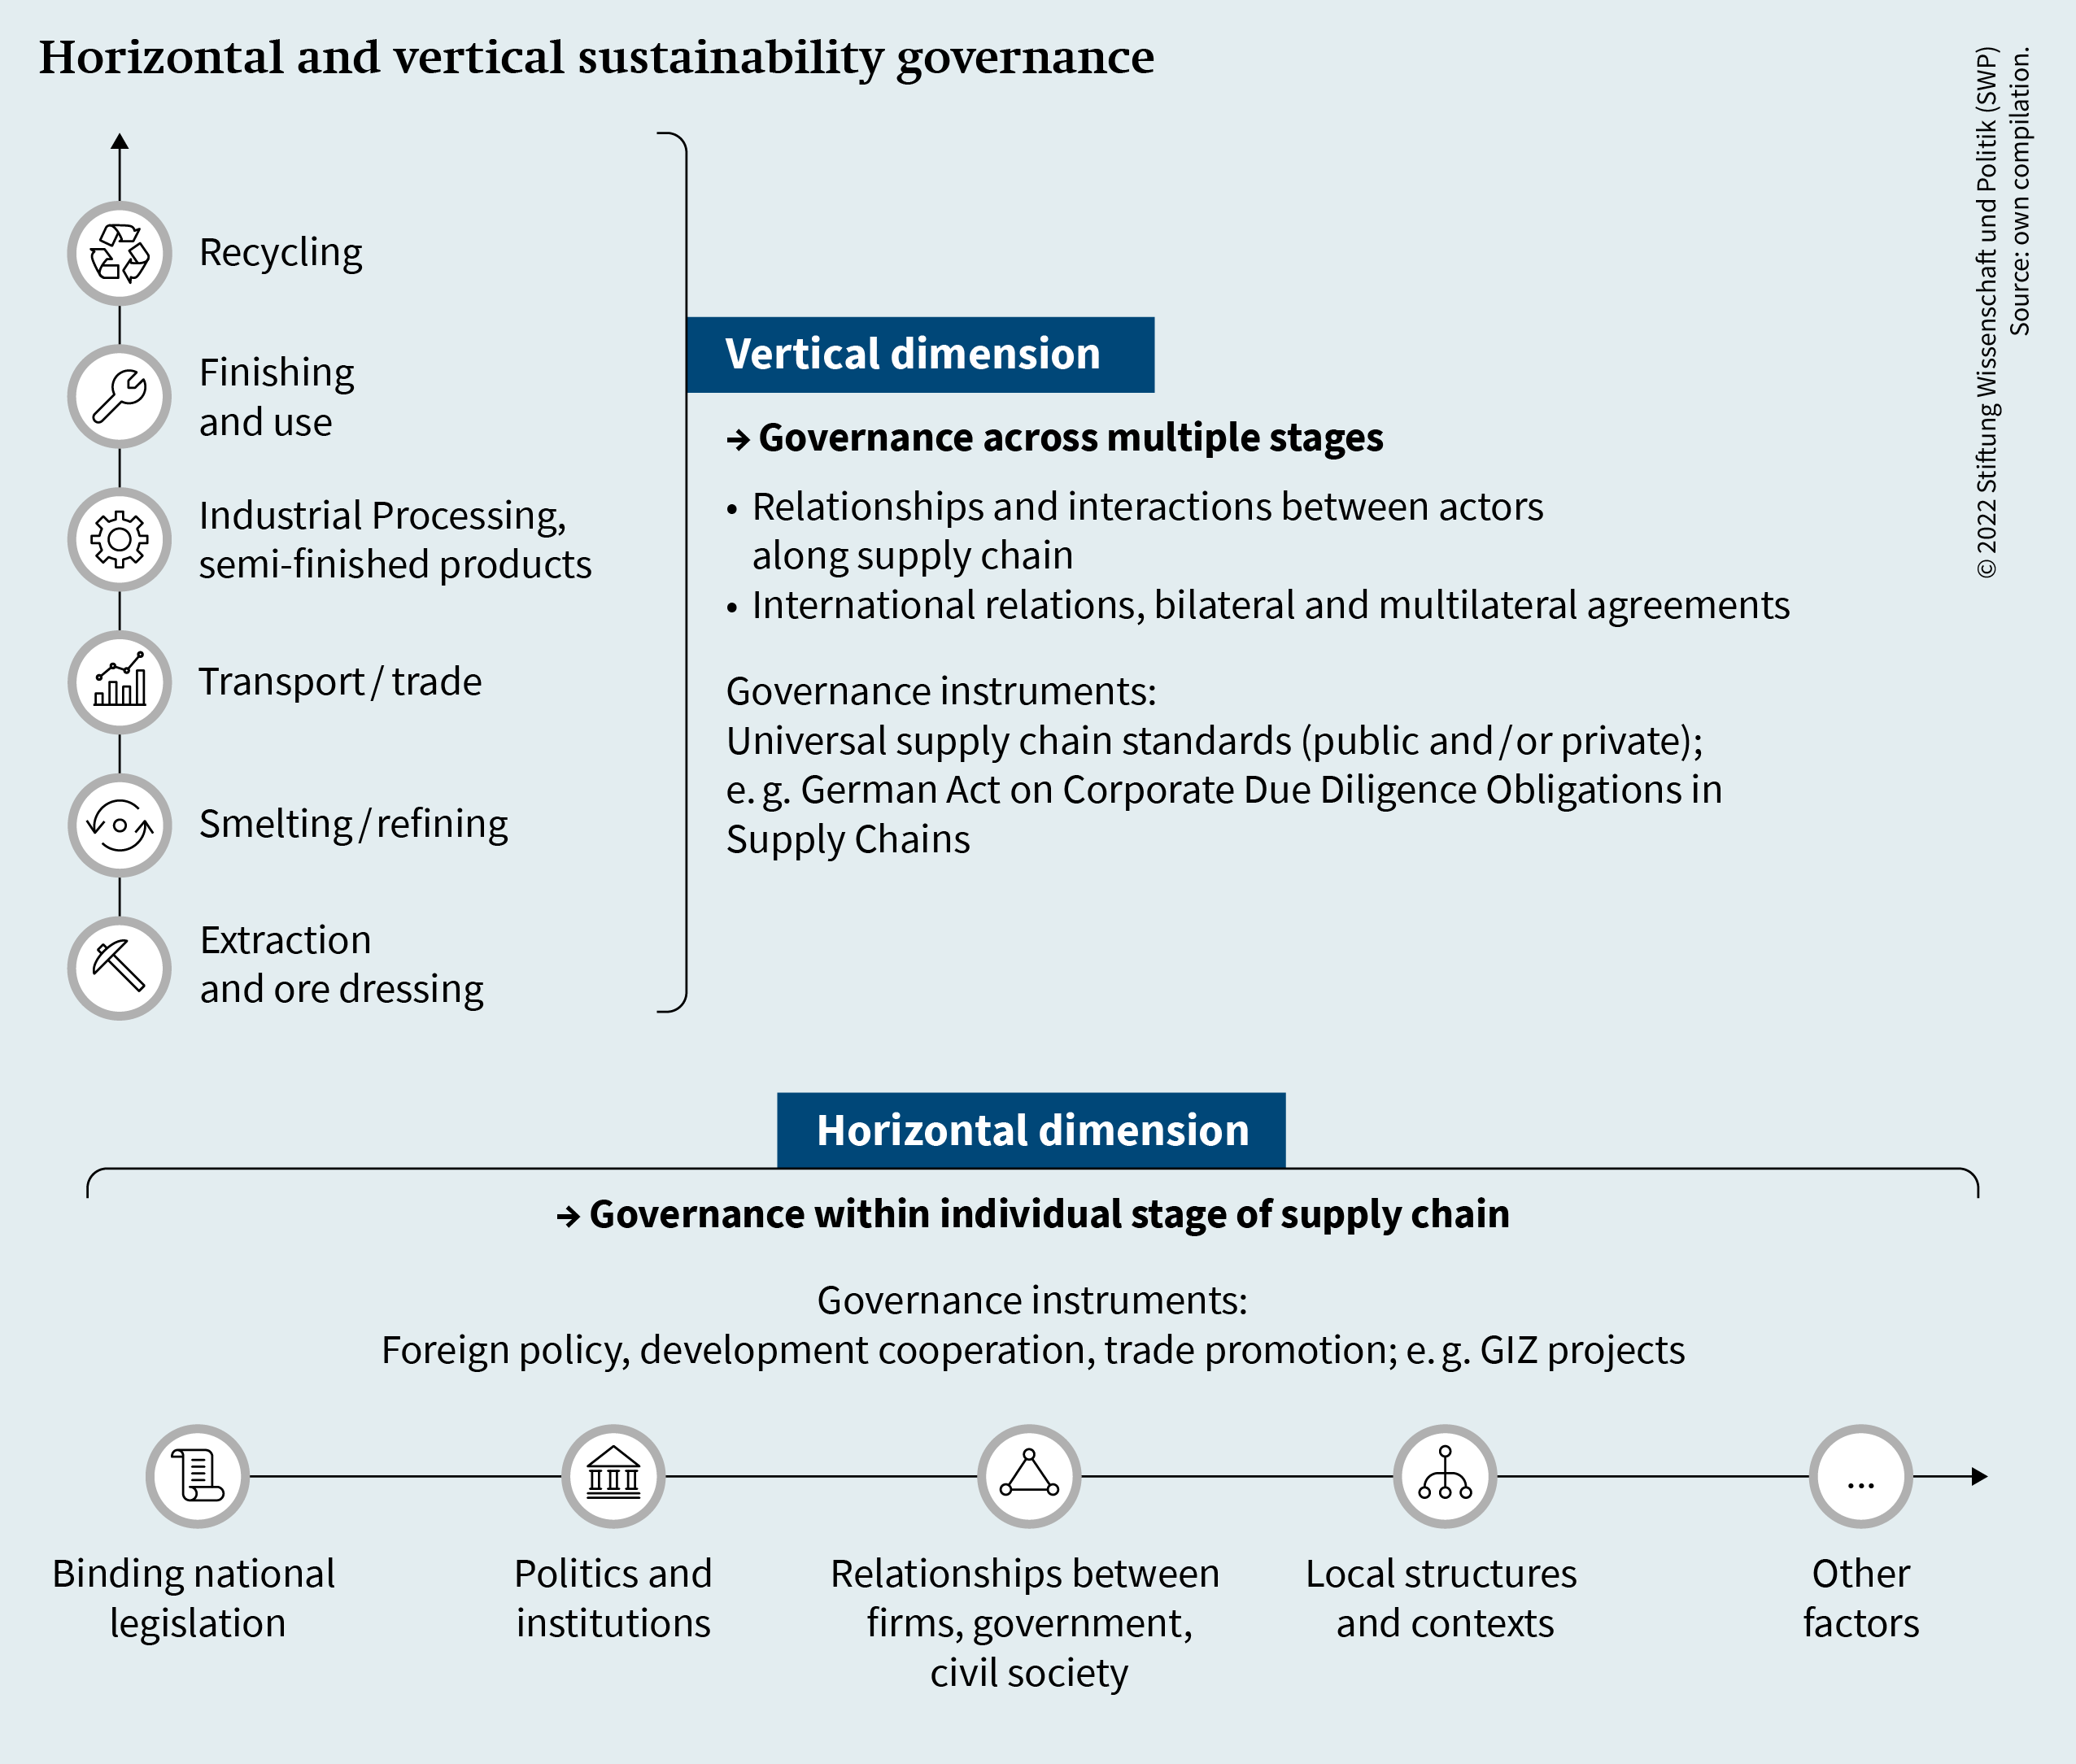 Horizontal and vertical sustainability governance